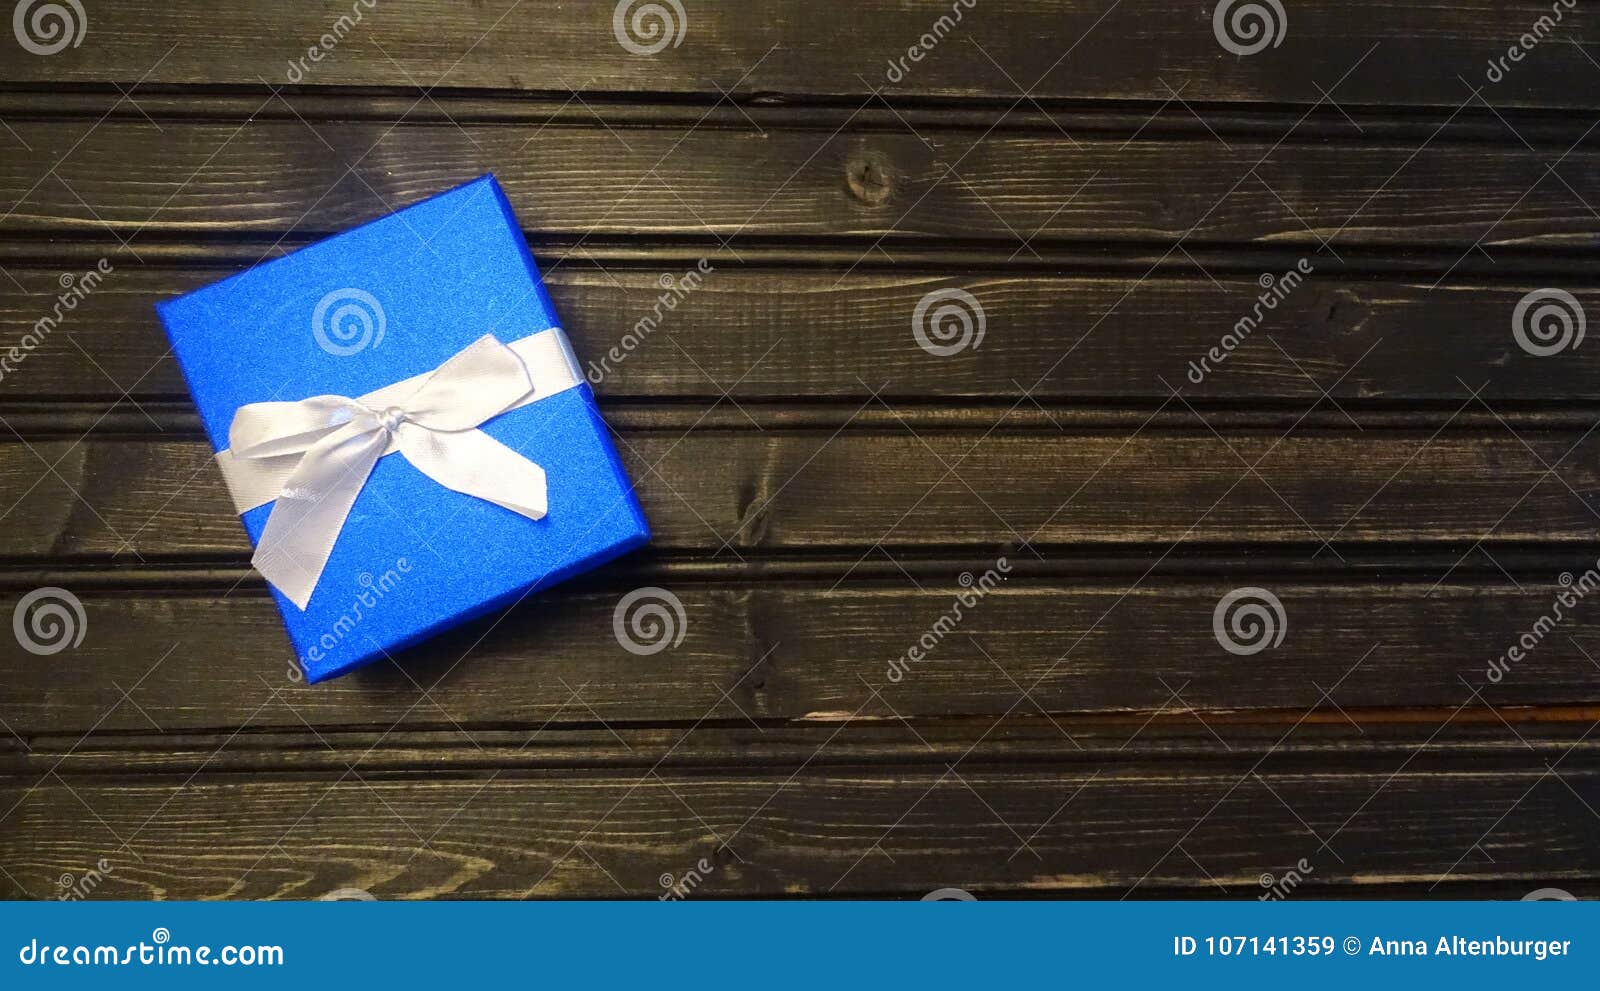 Blue Glitter Gift Box With A White Bow. Stock Image